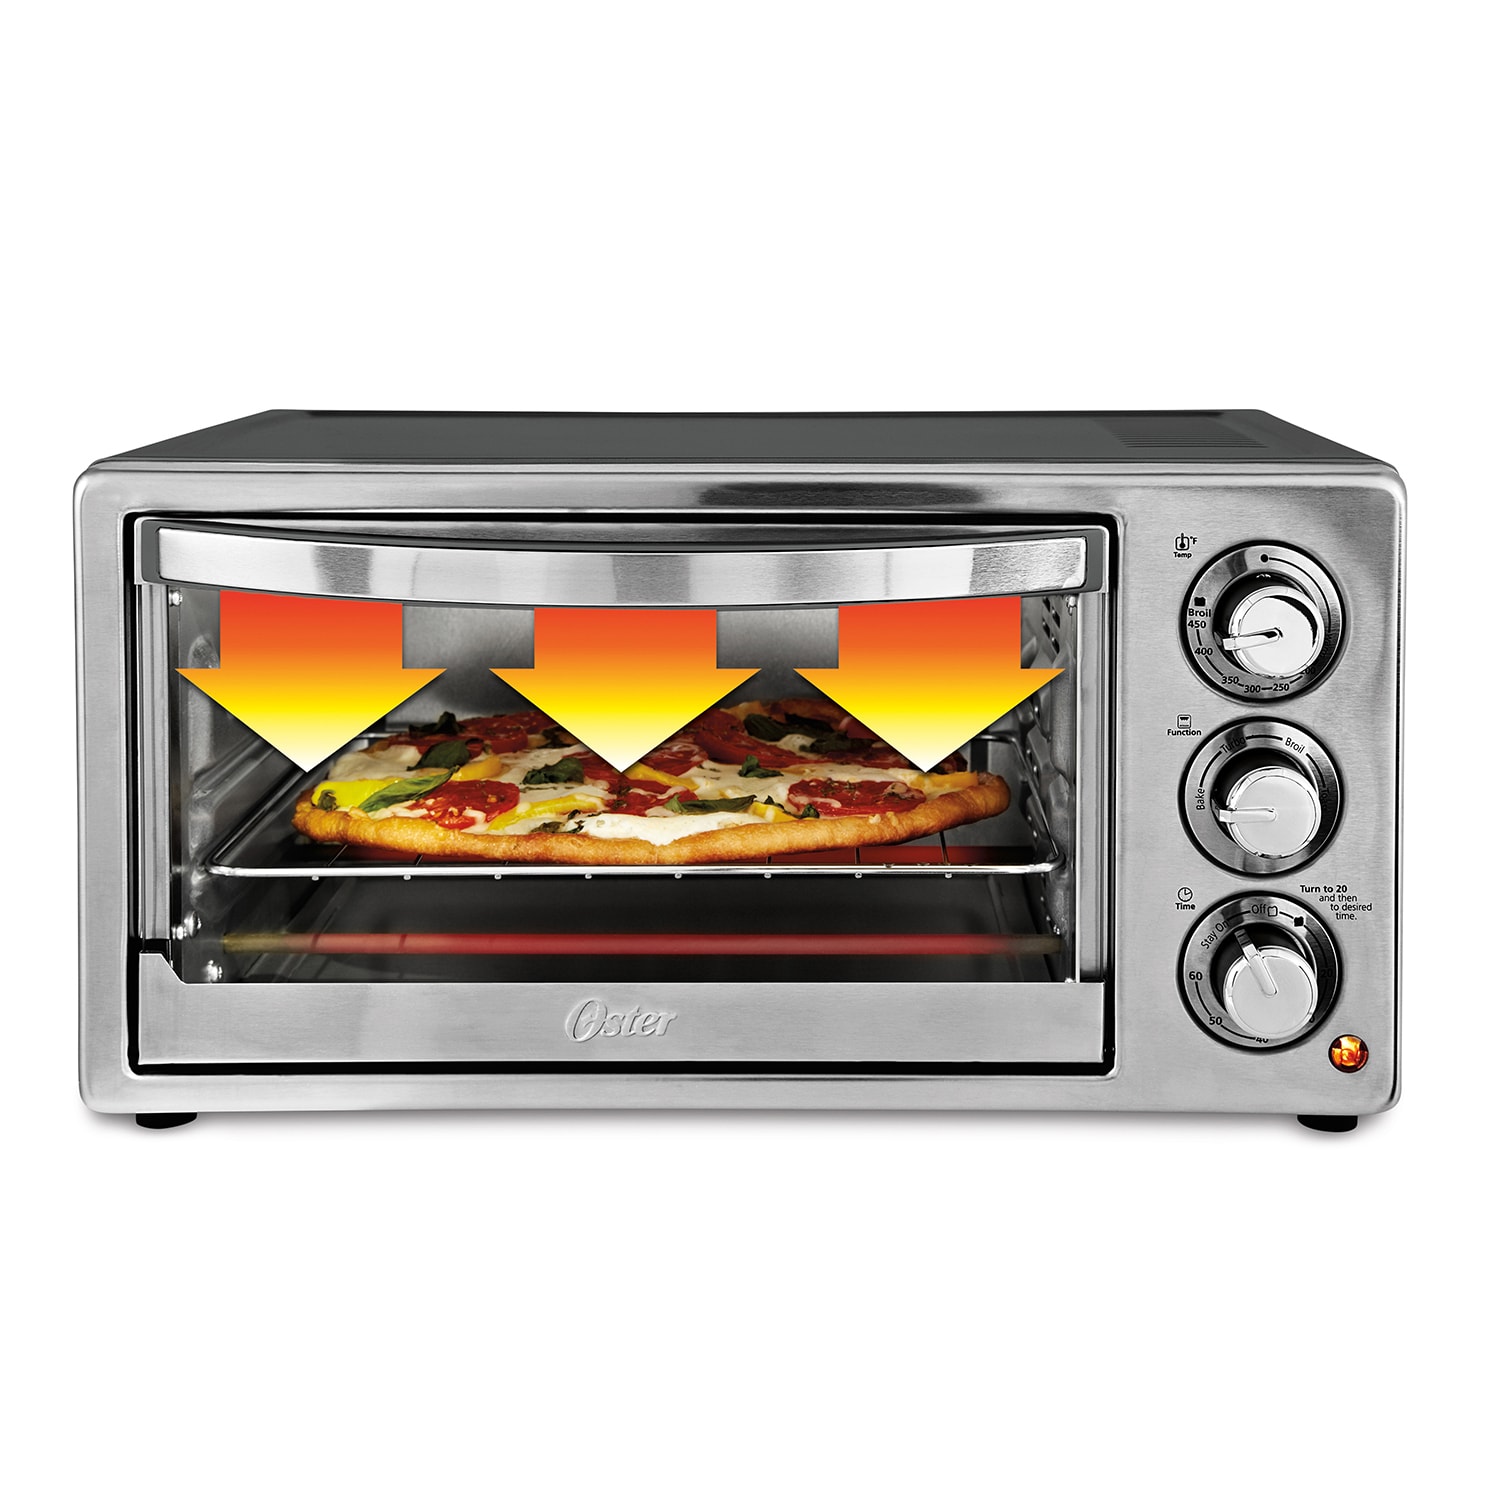 oster-toaster-convection-oven-recipes-i-decoration-ideas